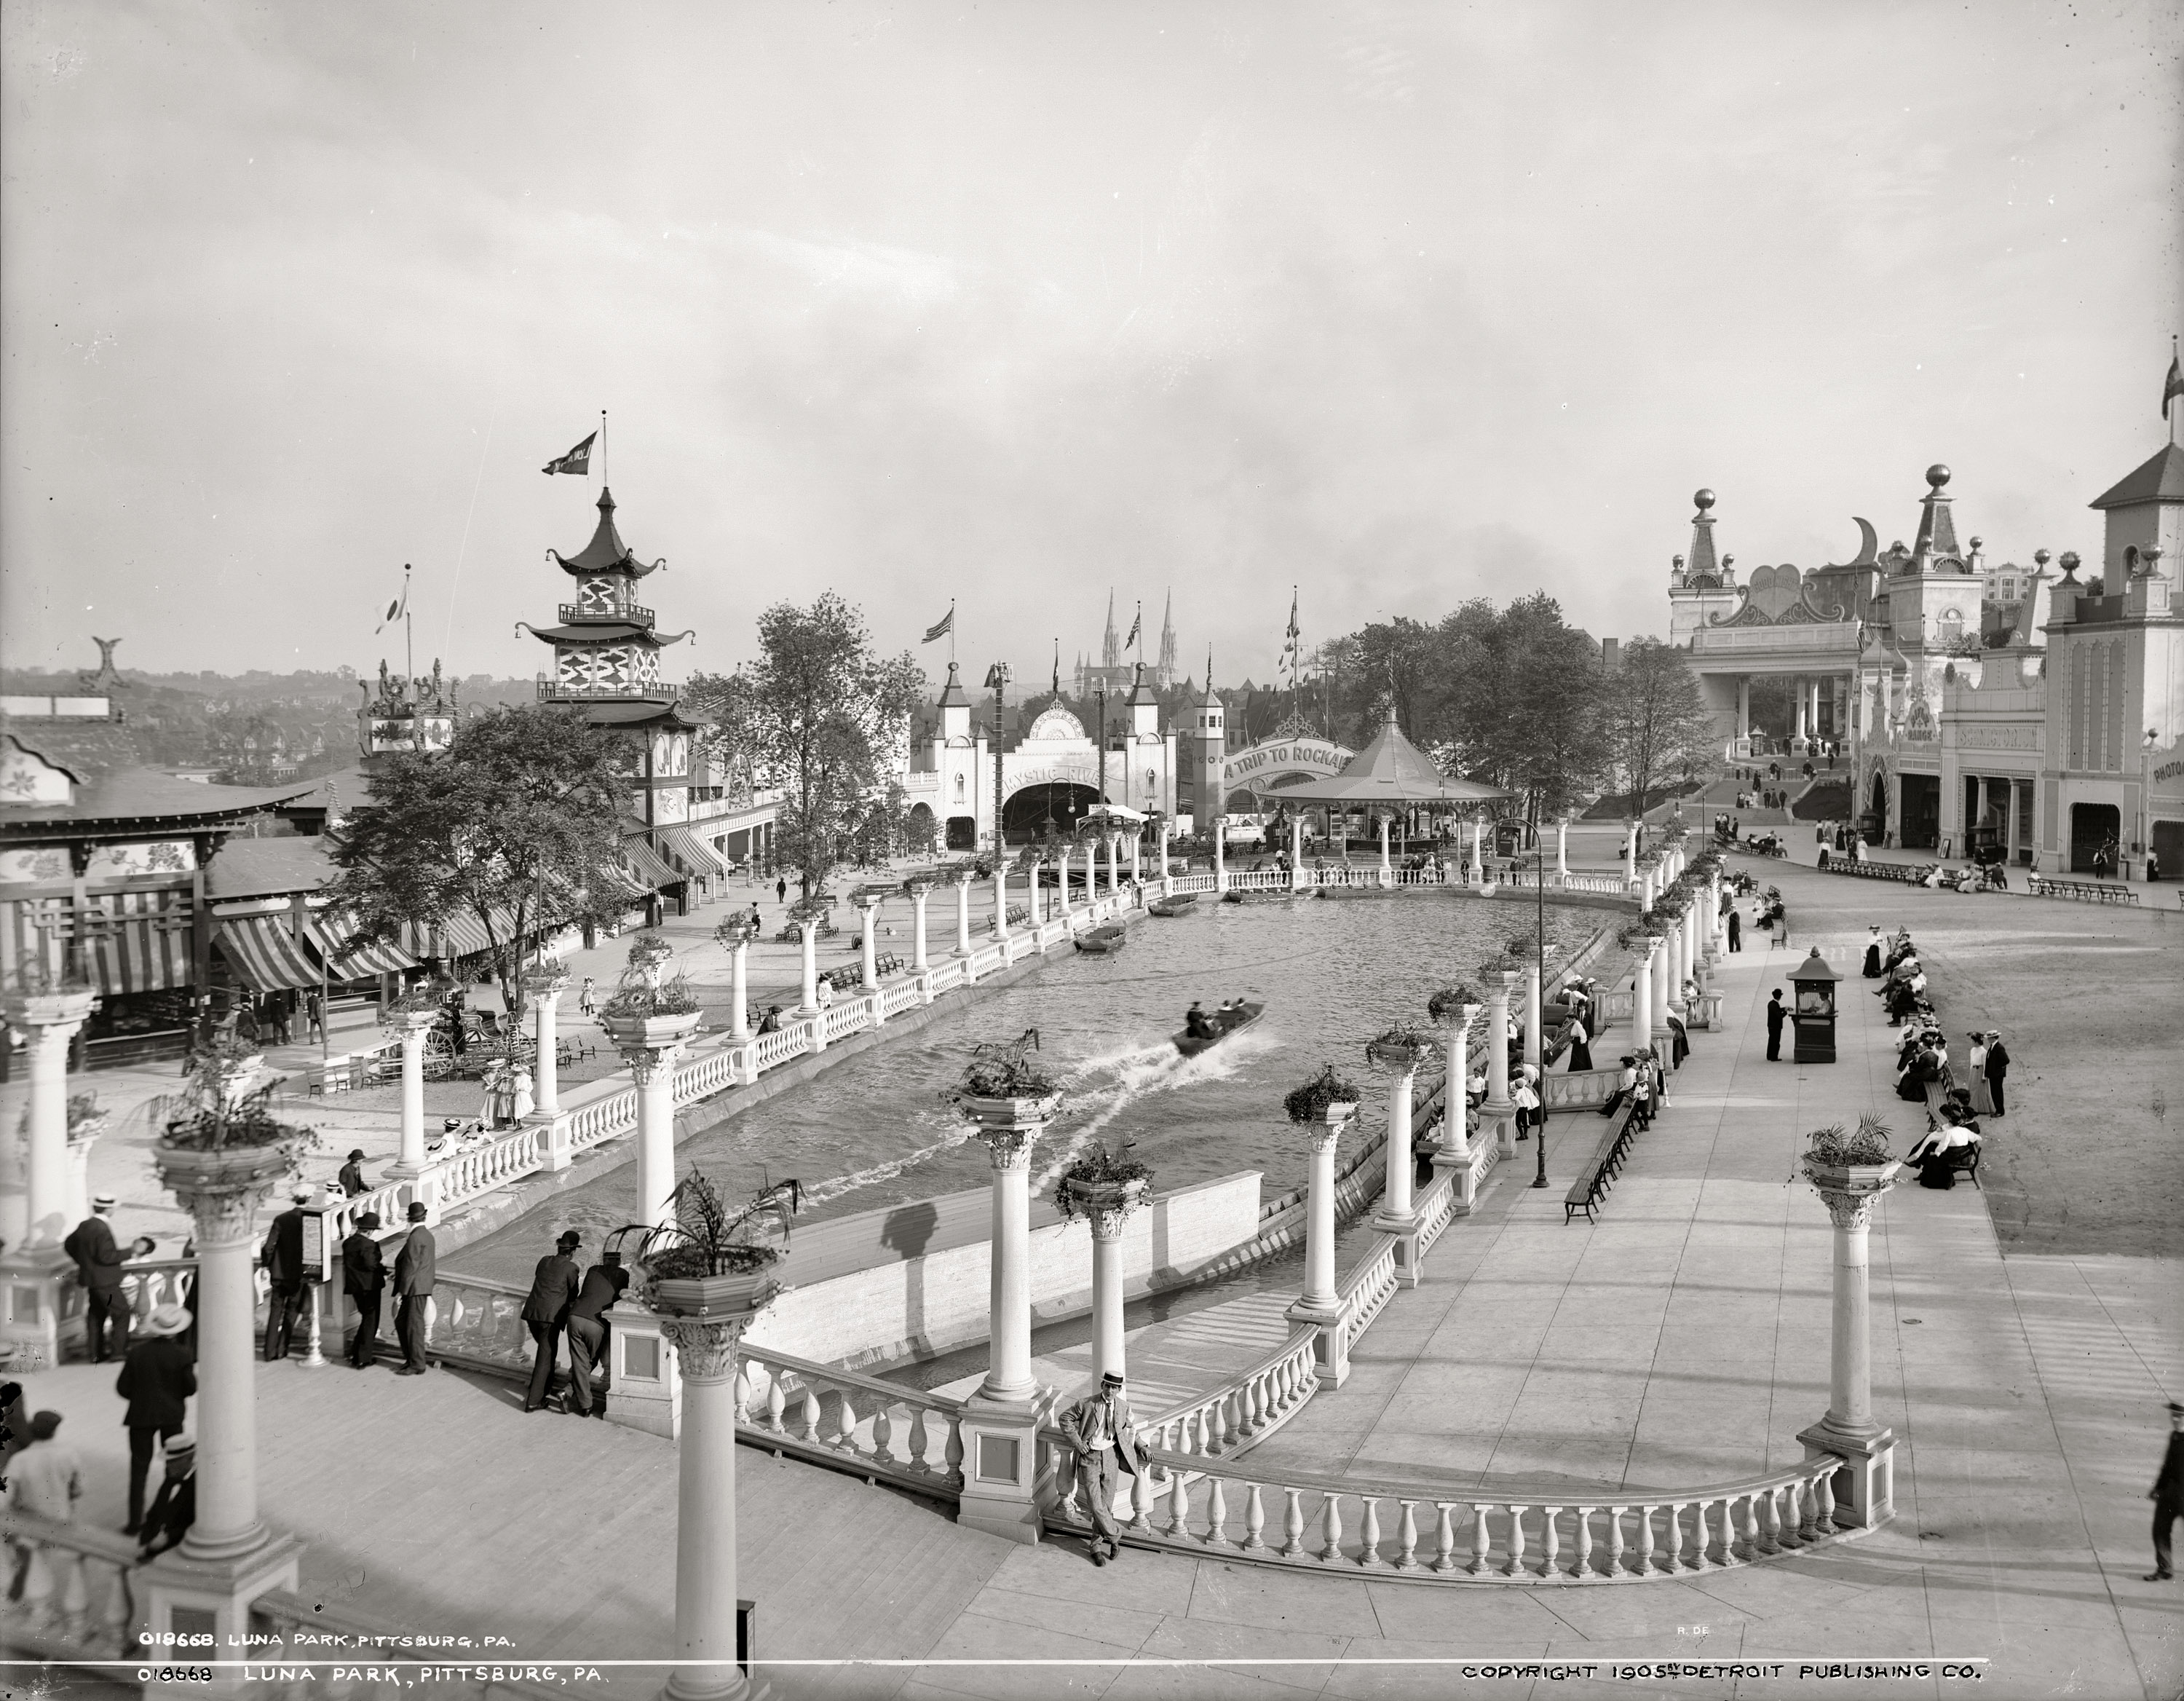 "Luna Park, Pittsburg, 1905." One of several amusement parks of the era that went by that name, the most famous being at Coney Island. At right: The park's "Scenictorium." Detroit Publishing Co. glass negative. View full size.